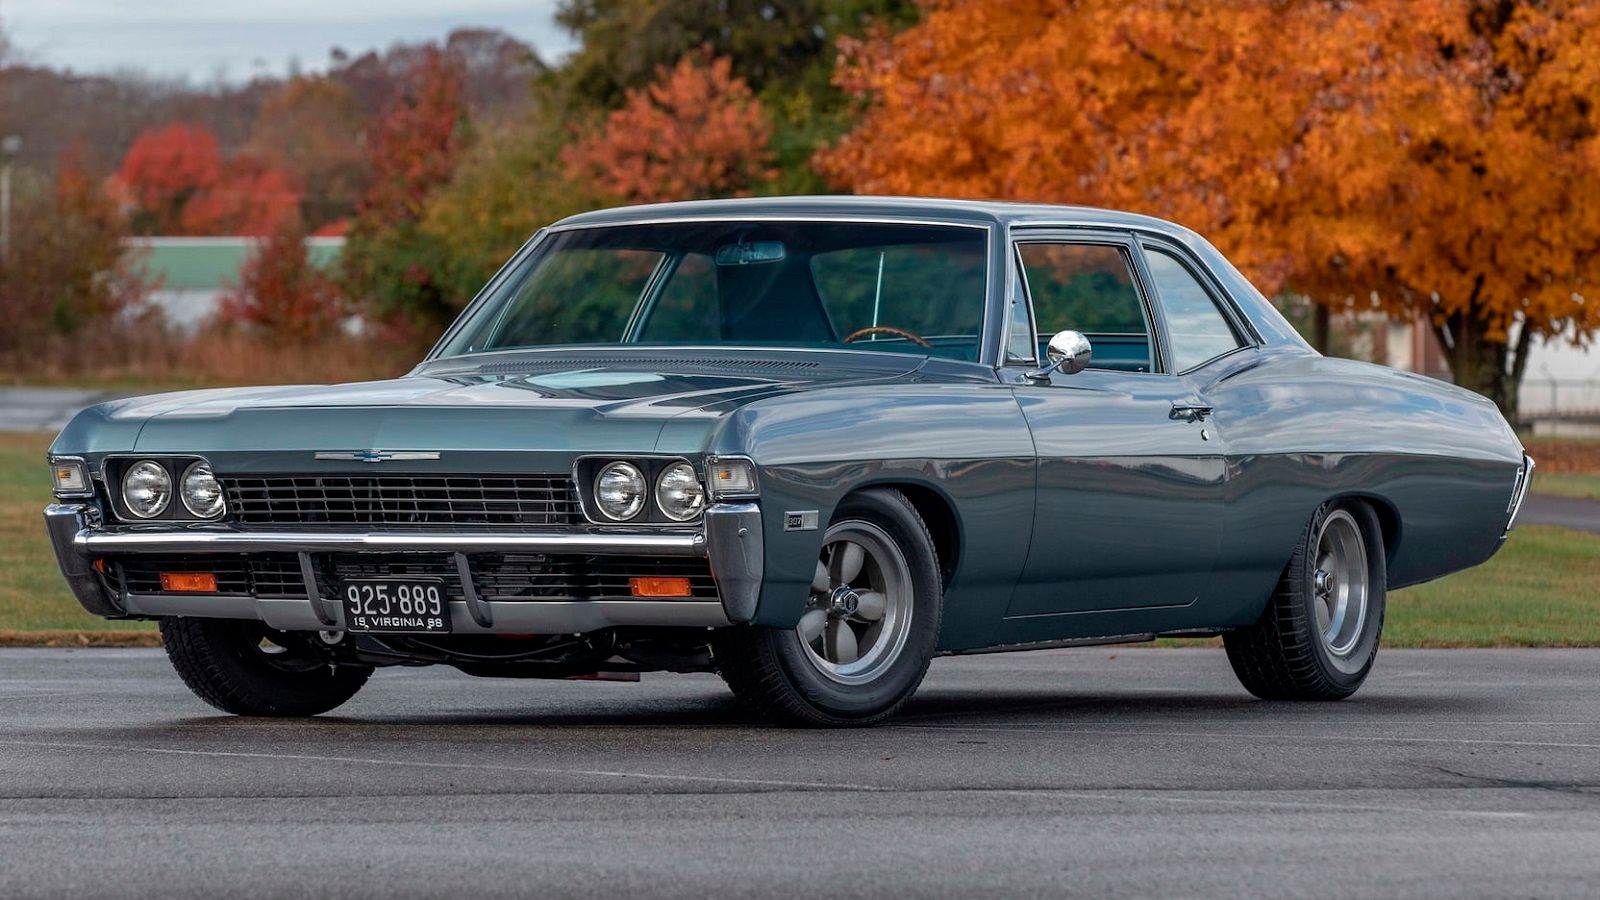 The origin of the 1968 Chevy Biscayne